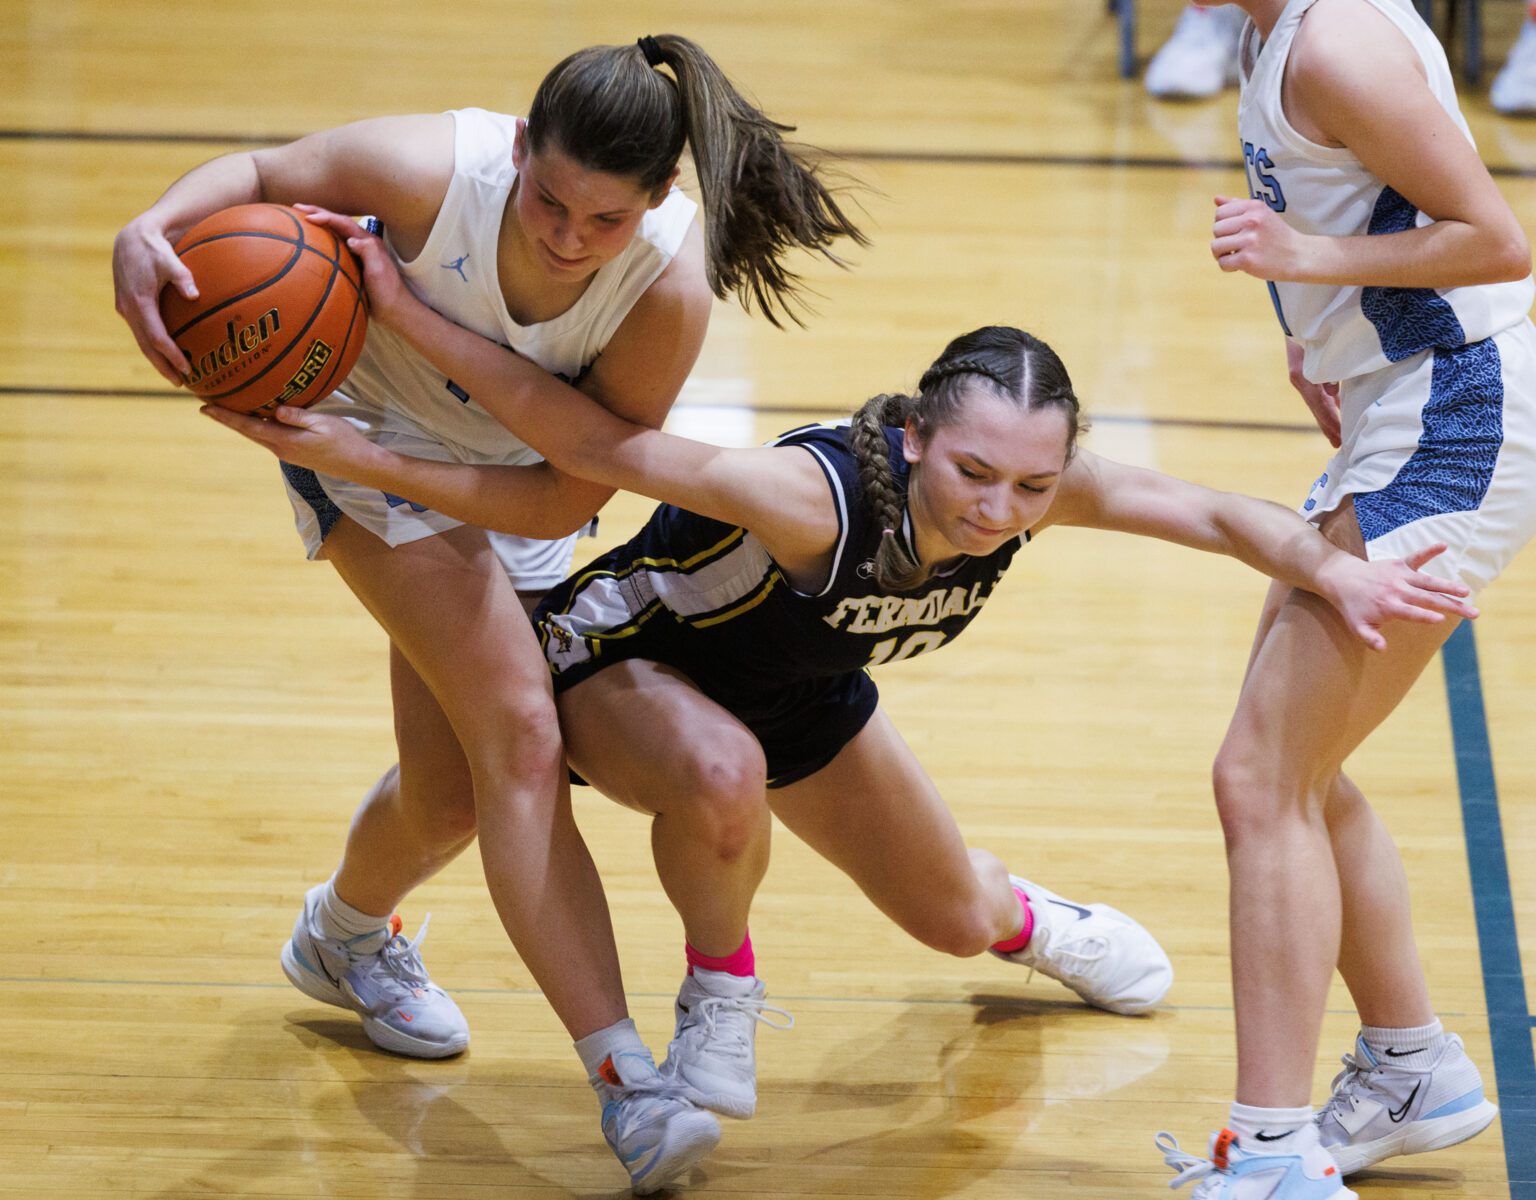 Lynden Christian's Grace Hintz steals the ball from Ferndale's Ellie Ochoa Jan. 28 in the second quarter of a Northwest Conference matchup at Lynden Christian High School. The Lyncs won 53-38.